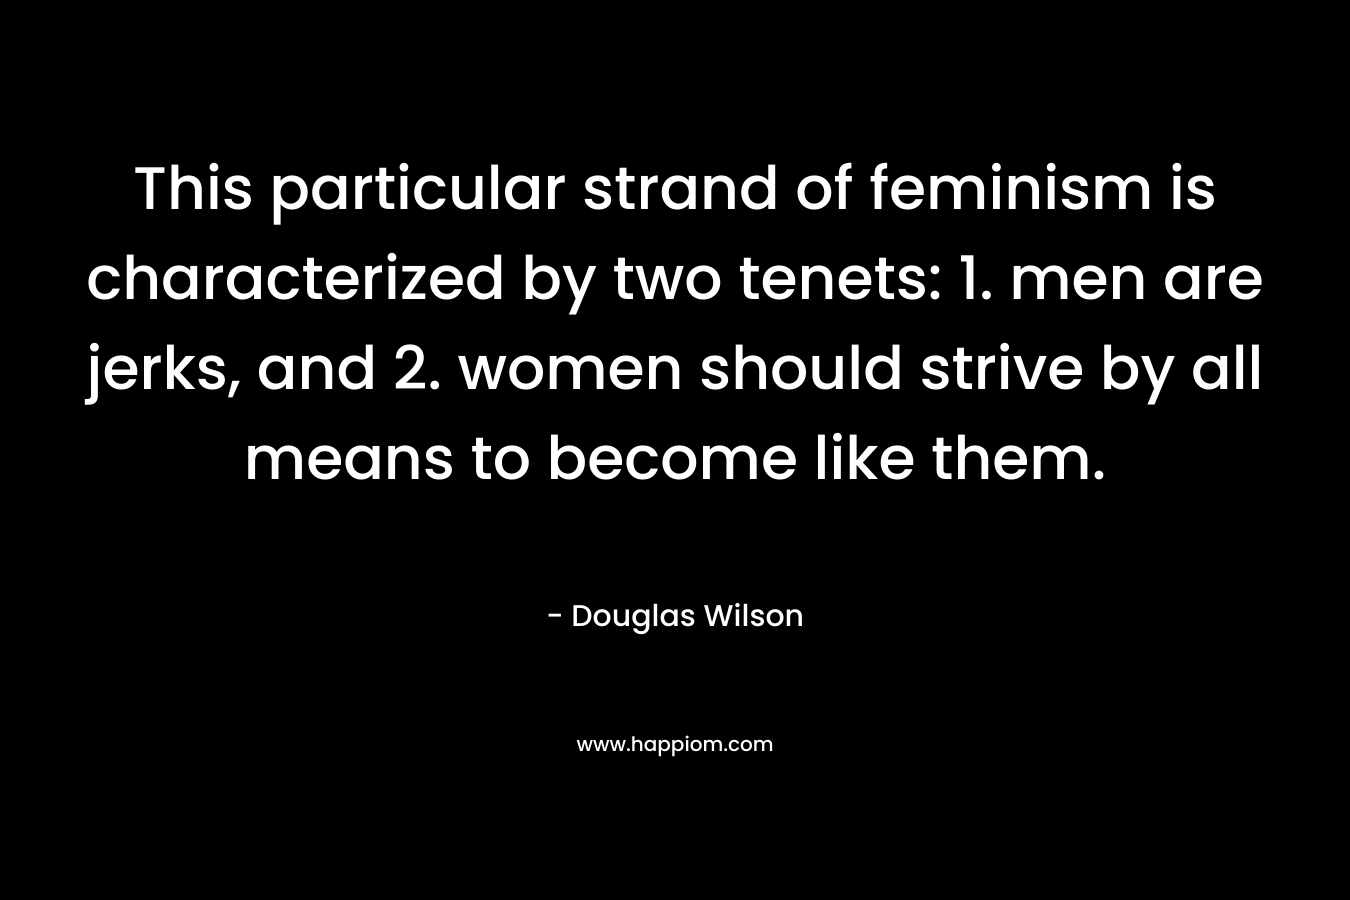 This particular strand of feminism is characterized by two tenets: 1. men are jerks, and 2. women should strive by all means to become like them. – Douglas Wilson